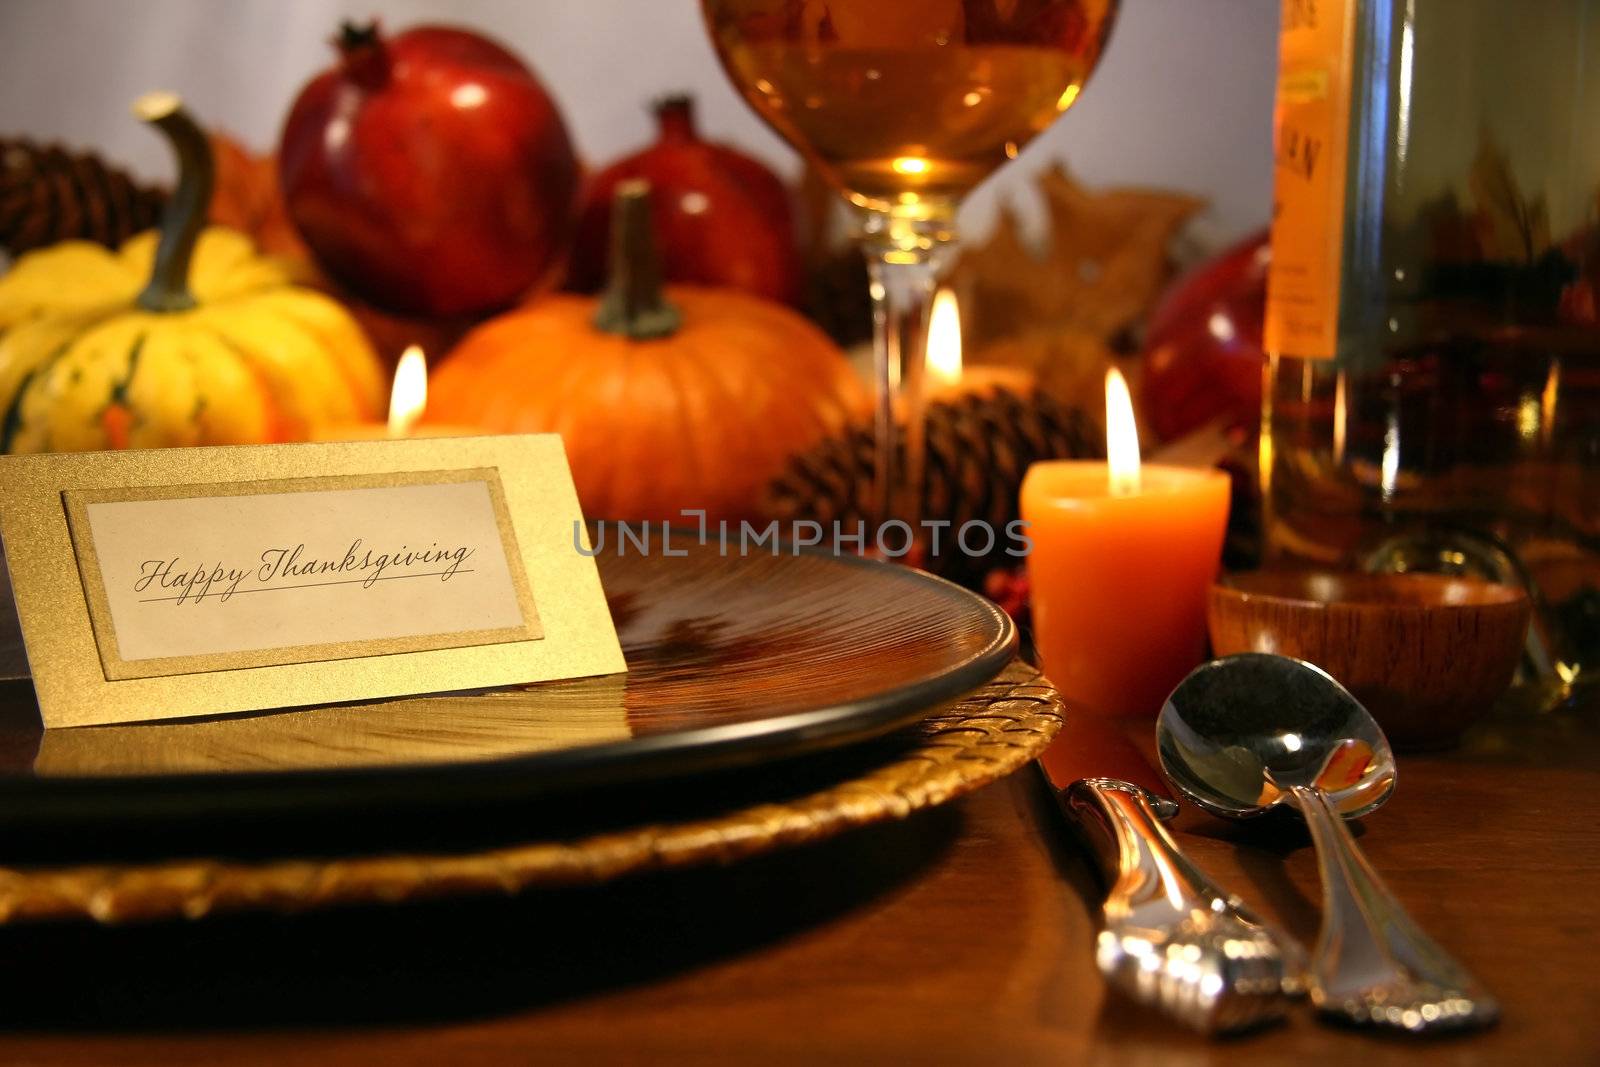 Thanksgiving place setting by Sandralise